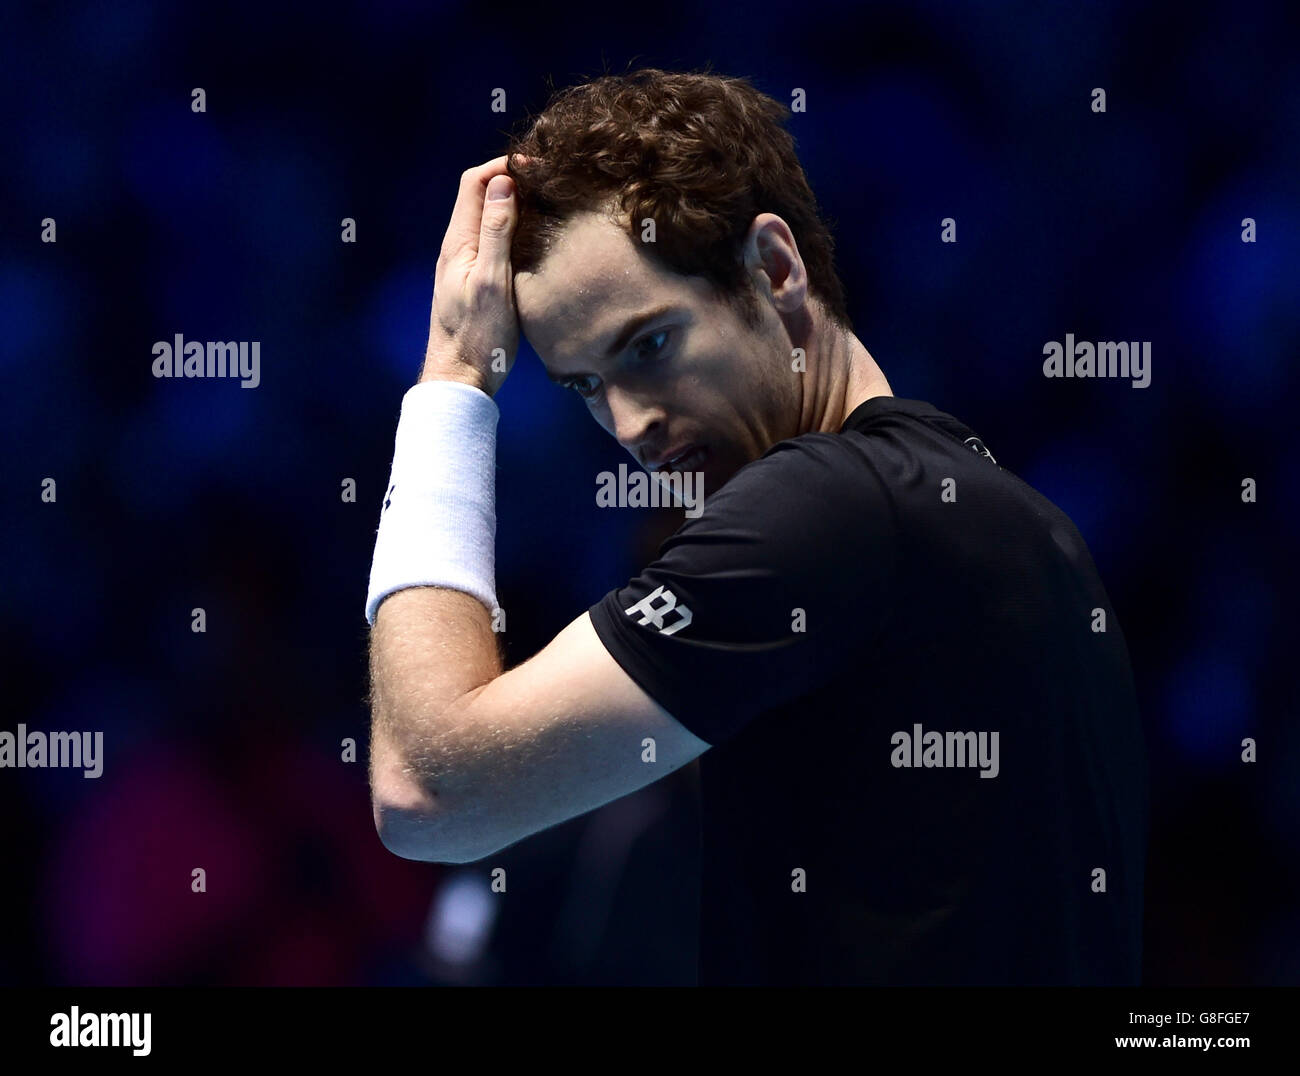 Great Britain's Andy Murray during day four of the ATP World Tour Finals at the O2 Arena, London. PRESS ASSSOCIATION Photo. Picture date: Wednesday November 18, 2015. See PA story TENNIS London. Photo credit should read: Adam Davy/PA Wire. Stock Photo